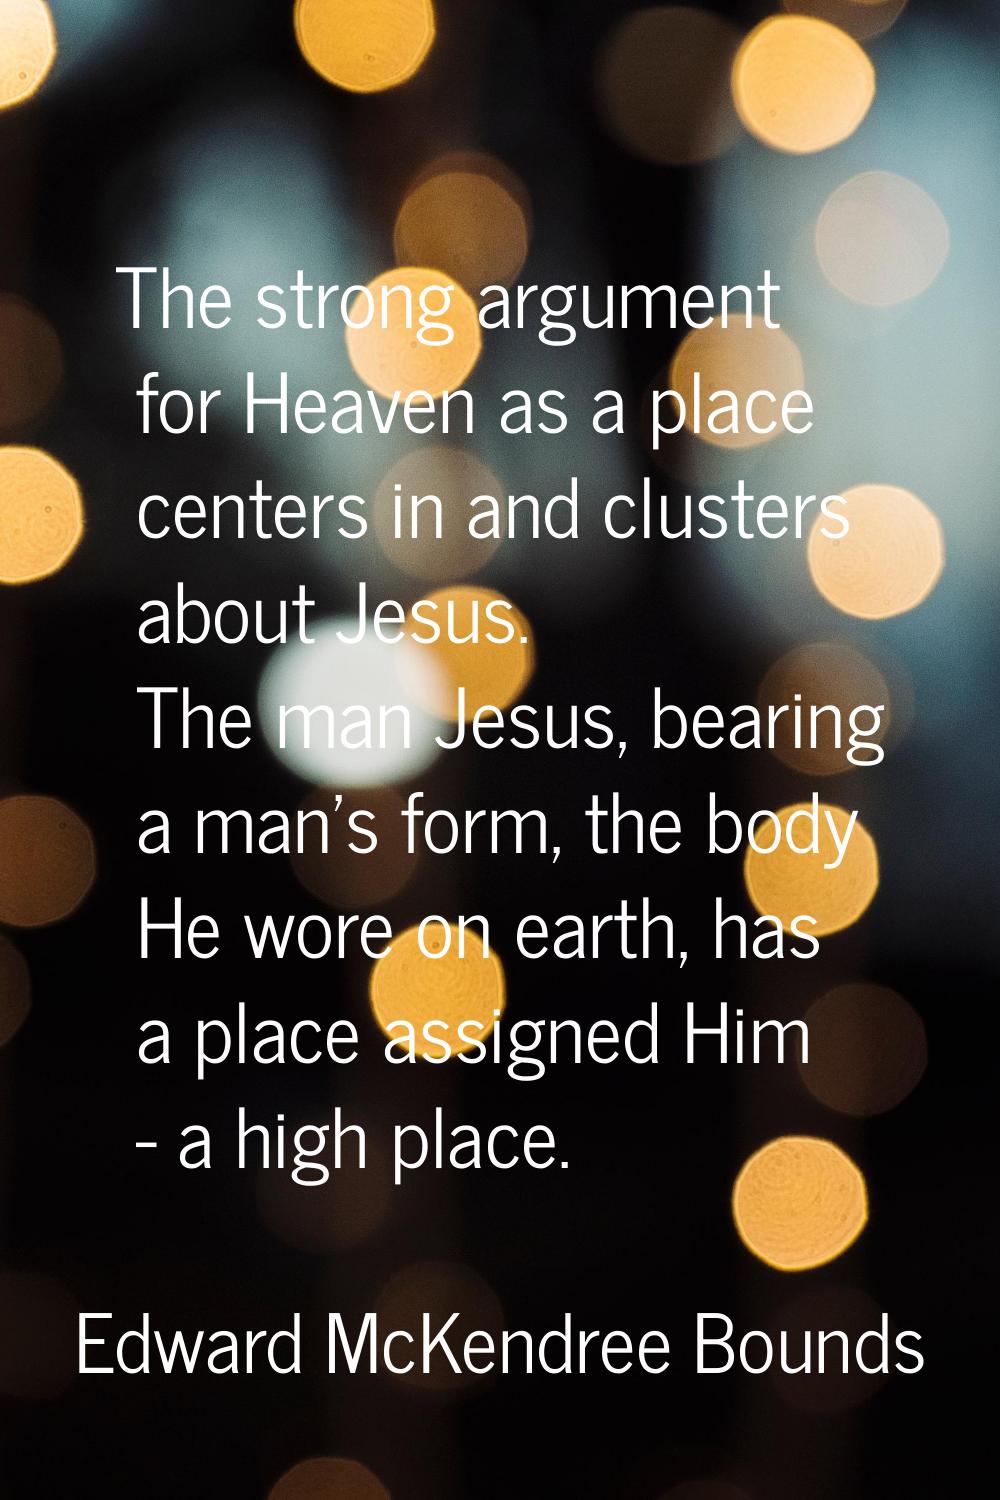 The strong argument for Heaven as a place centers in and clusters about Jesus. The man Jesus, beari